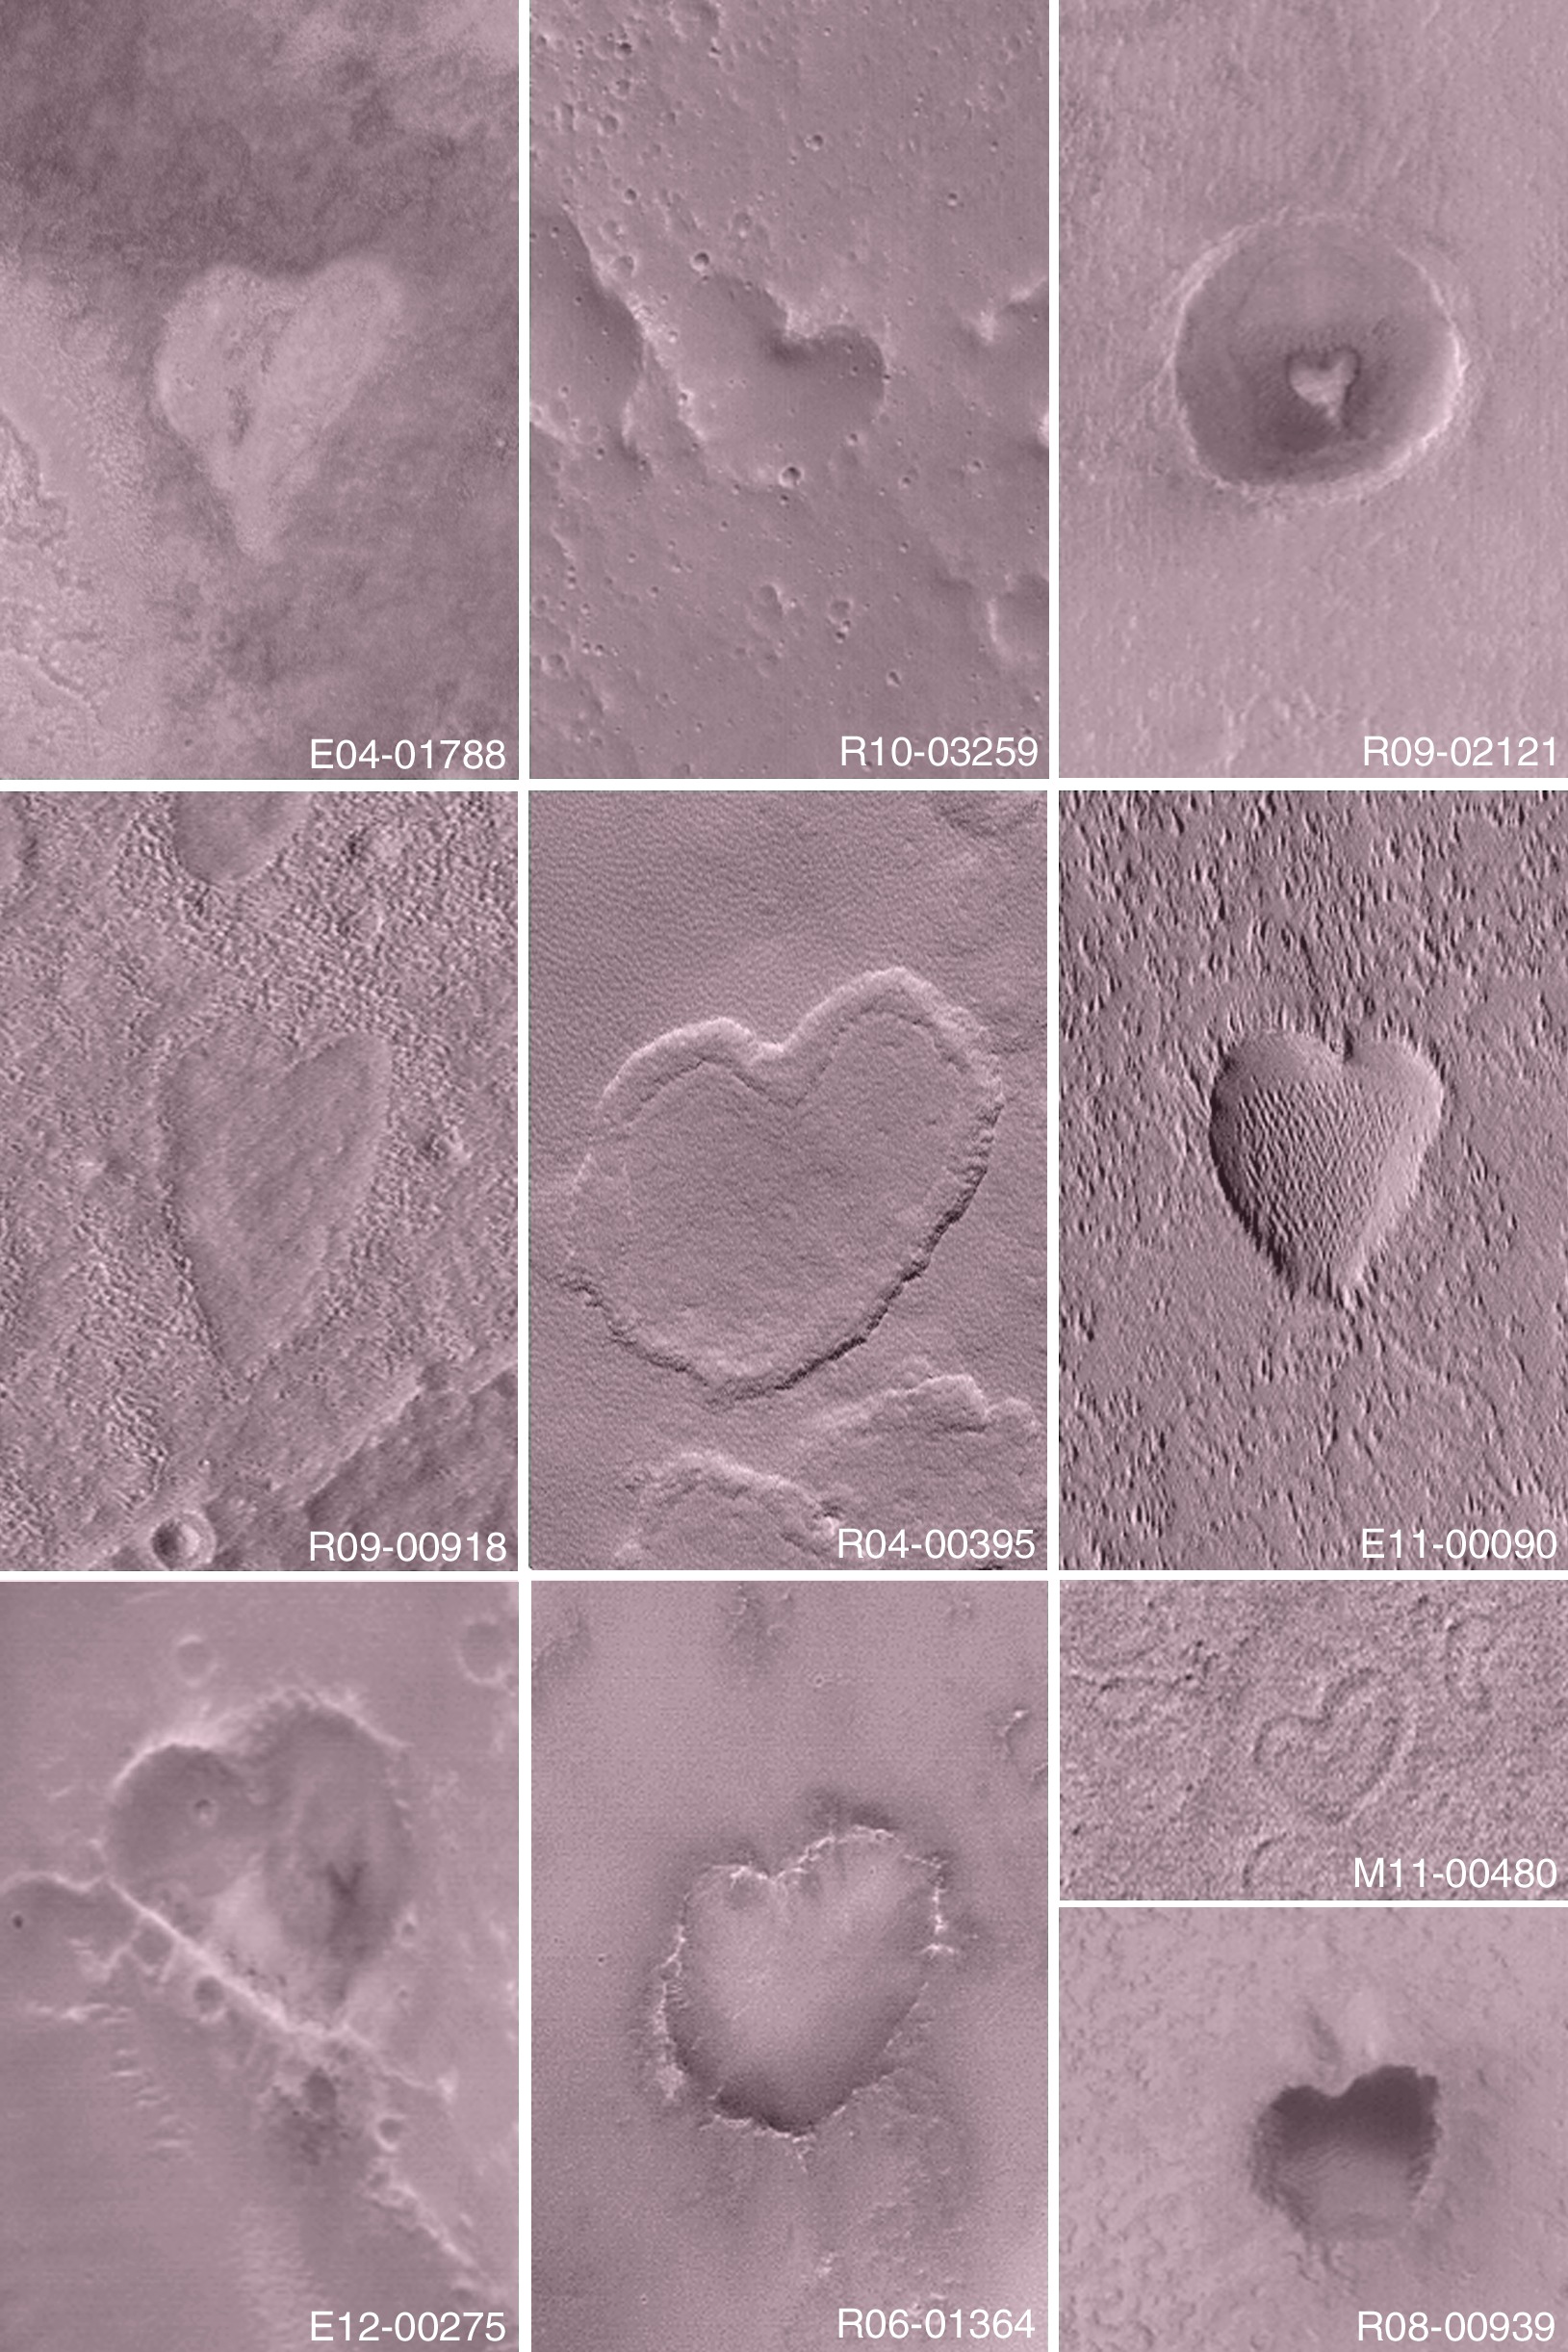 multiple images of heart-shaped craters on Mars taken with the MGS
spacecraft